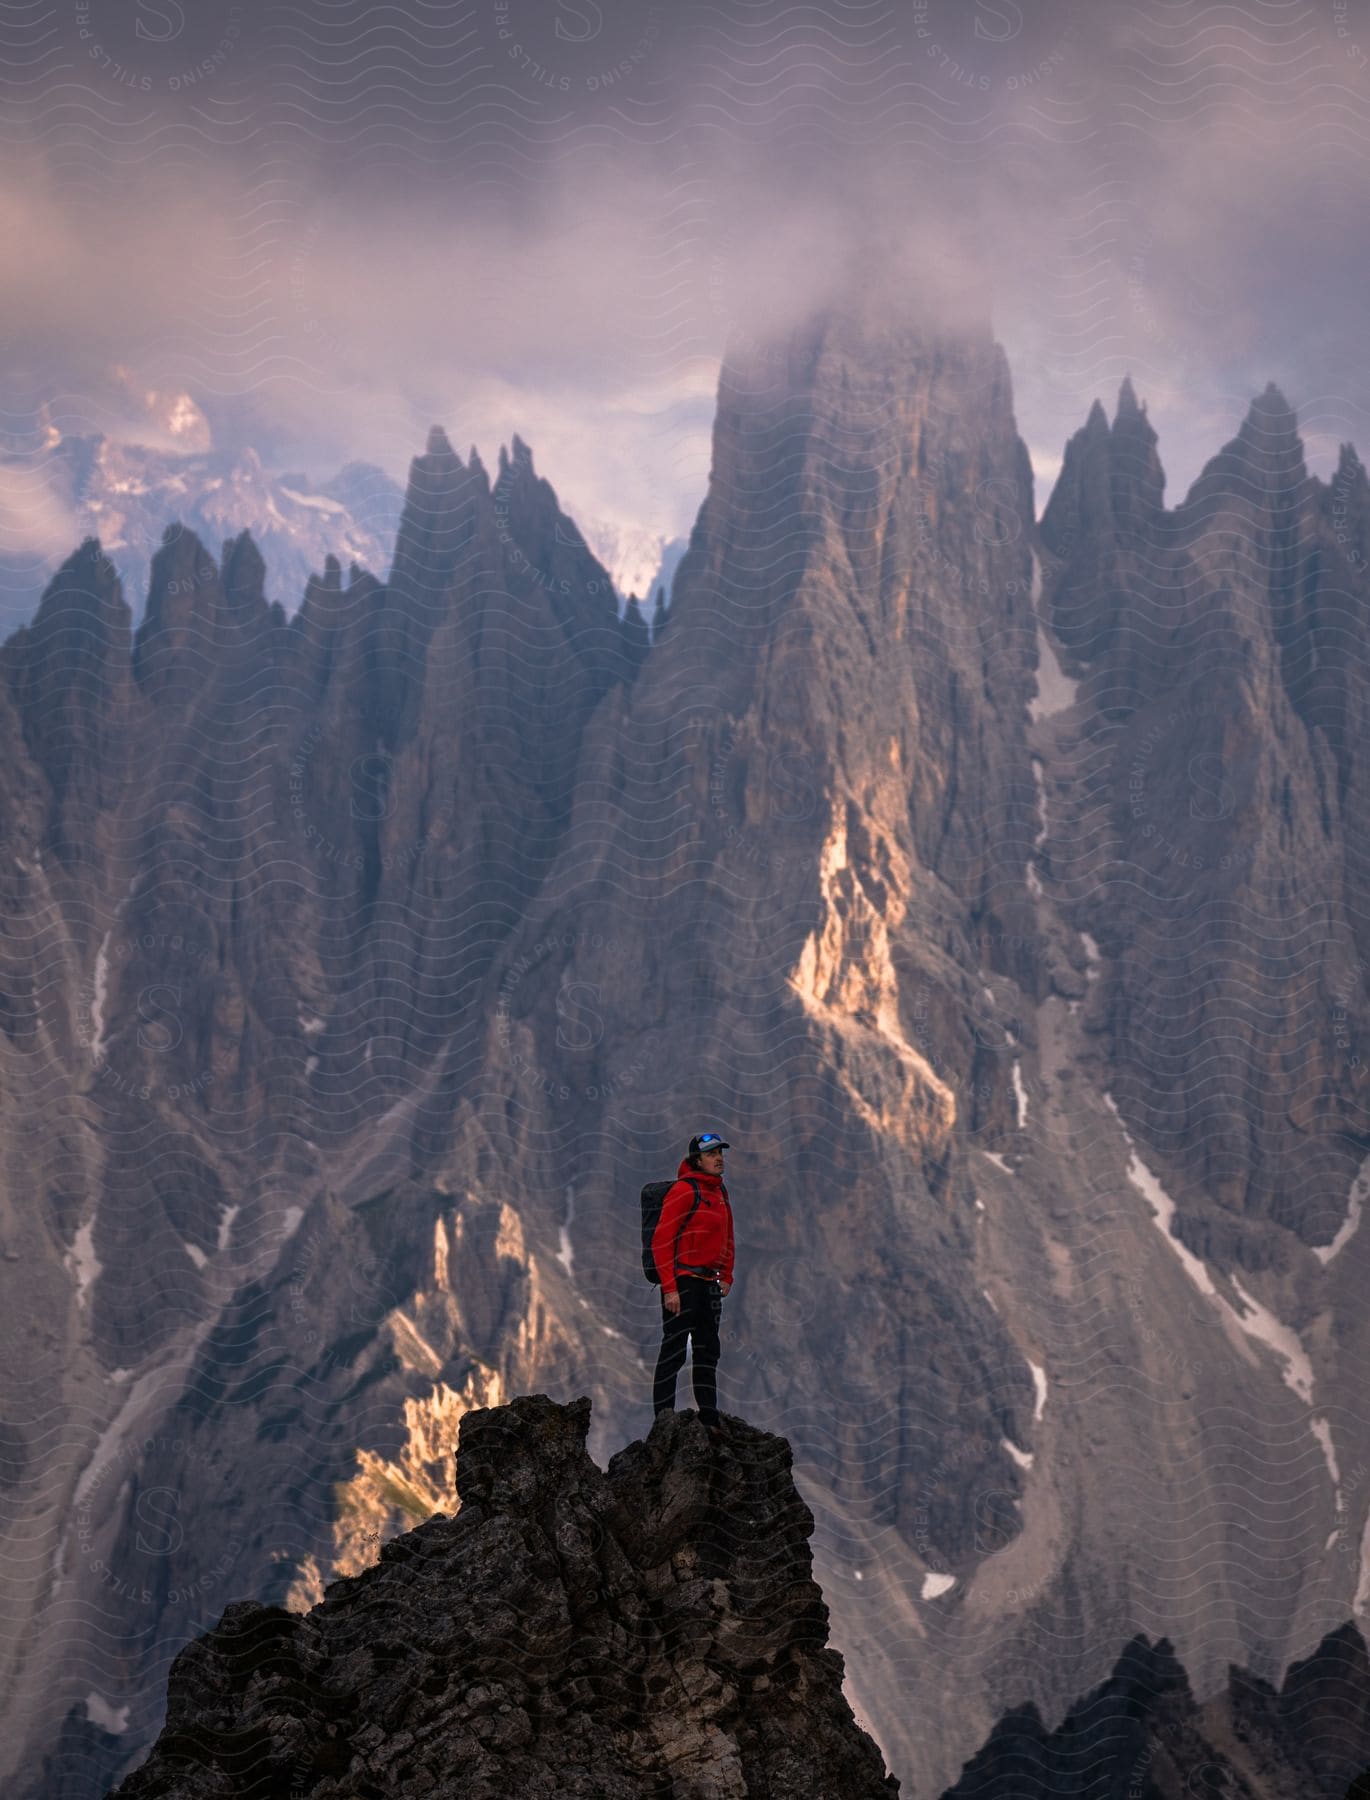 A person in a red coat is standing on a rocky peak in an impressive view of sharp and pointed rocky mountain peaks under a cloudy sky.